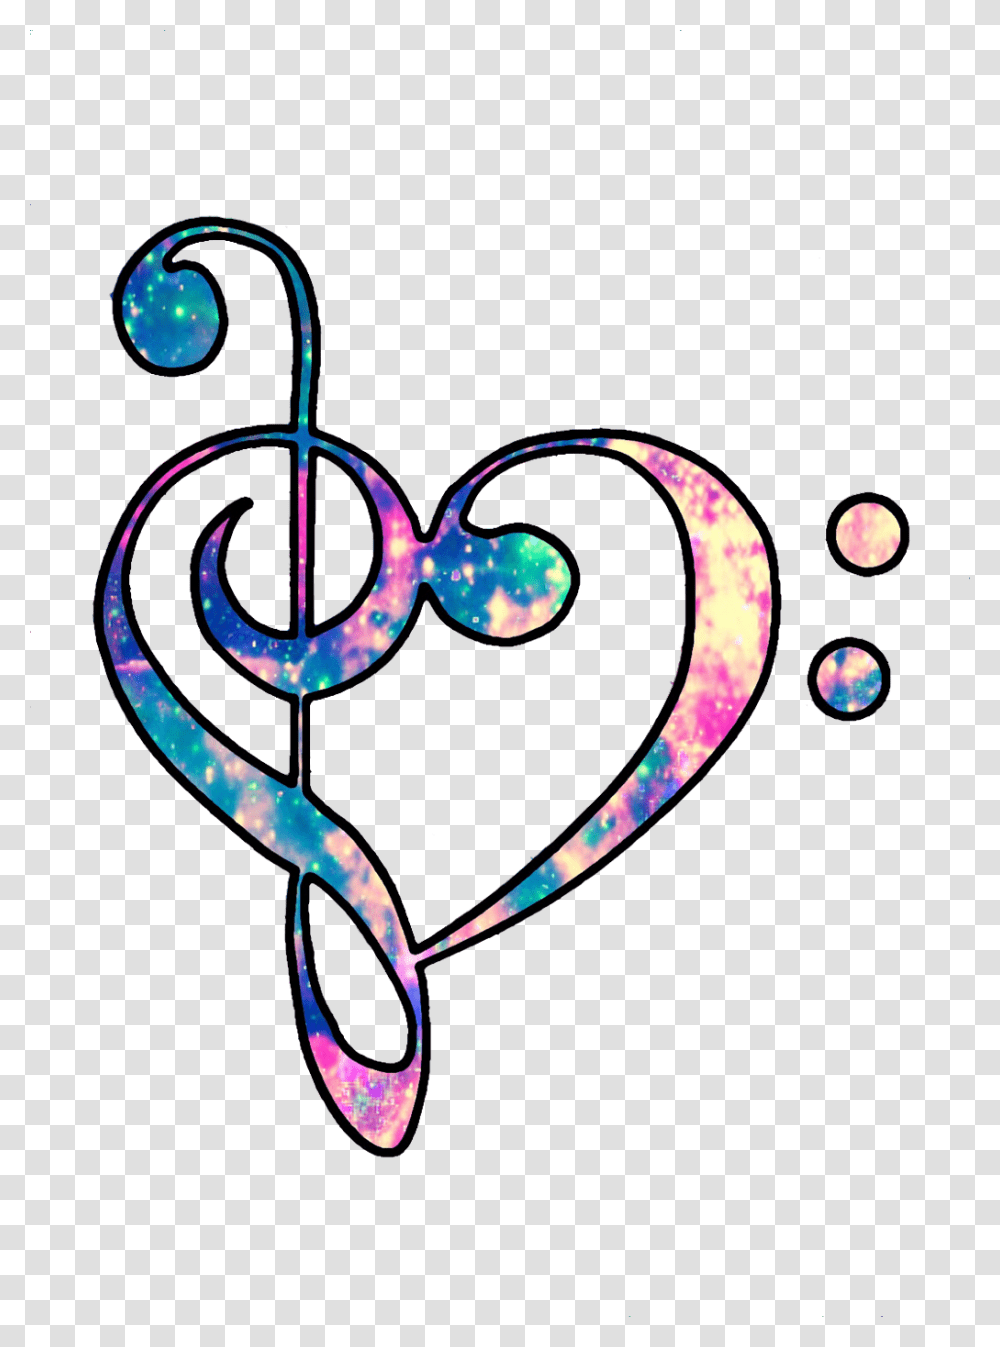 Ftestickers Hearts Love Music Trebleclef Musicnotes Colorful Treble Clef Heart, Pattern, Ornament, Fractal Transparent Png